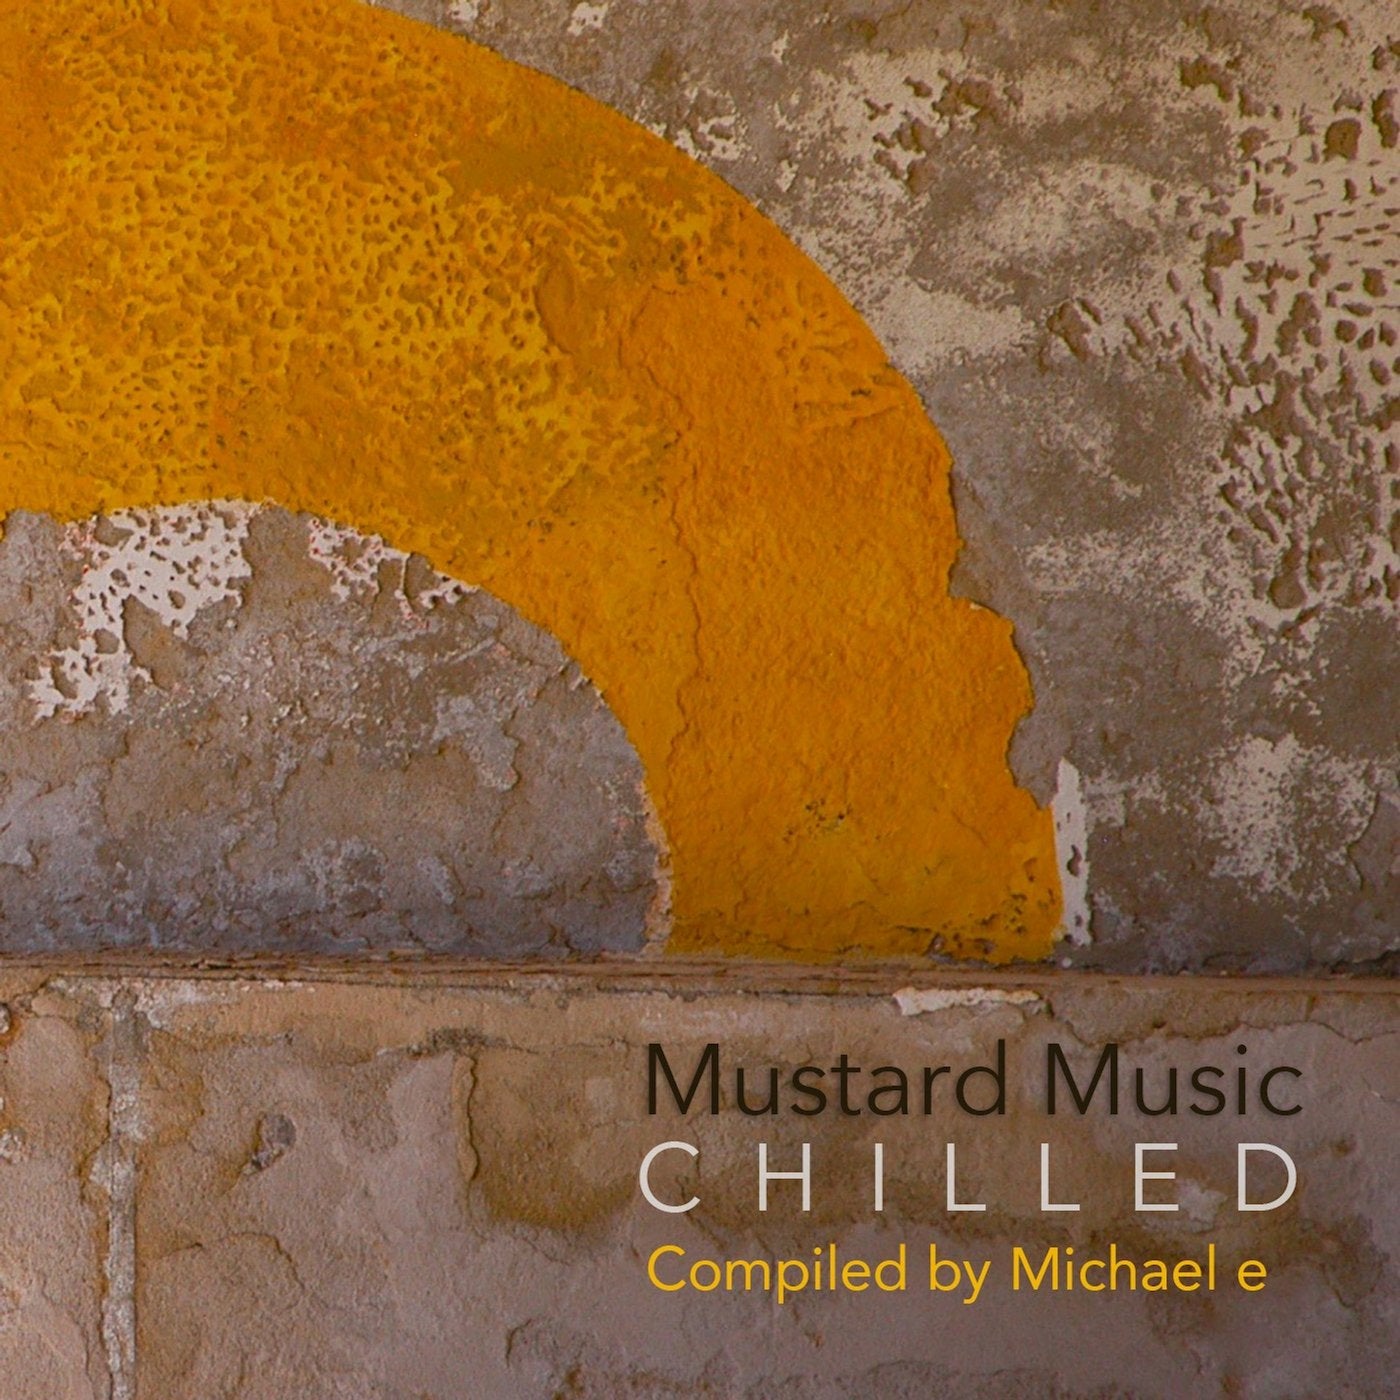 Mustard Music Chilled - Compiled by Michael e